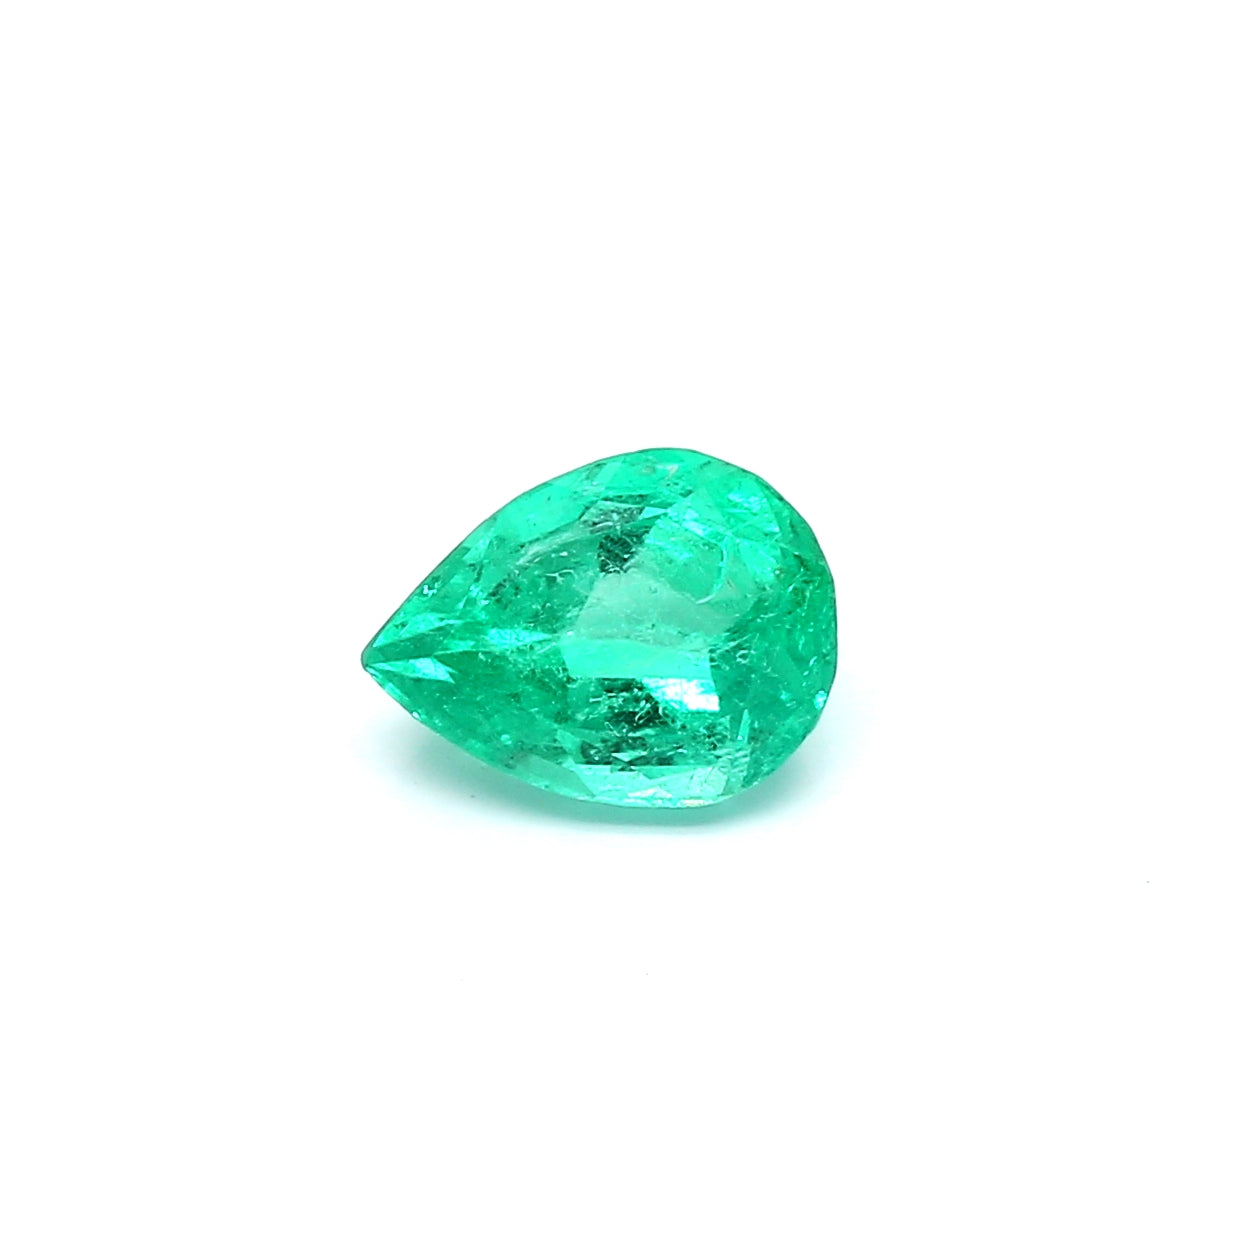 1.17ct Pear Shape Emerald, Moderate Oil, Colombia - 8.33 x 6.27 x 4.14mm